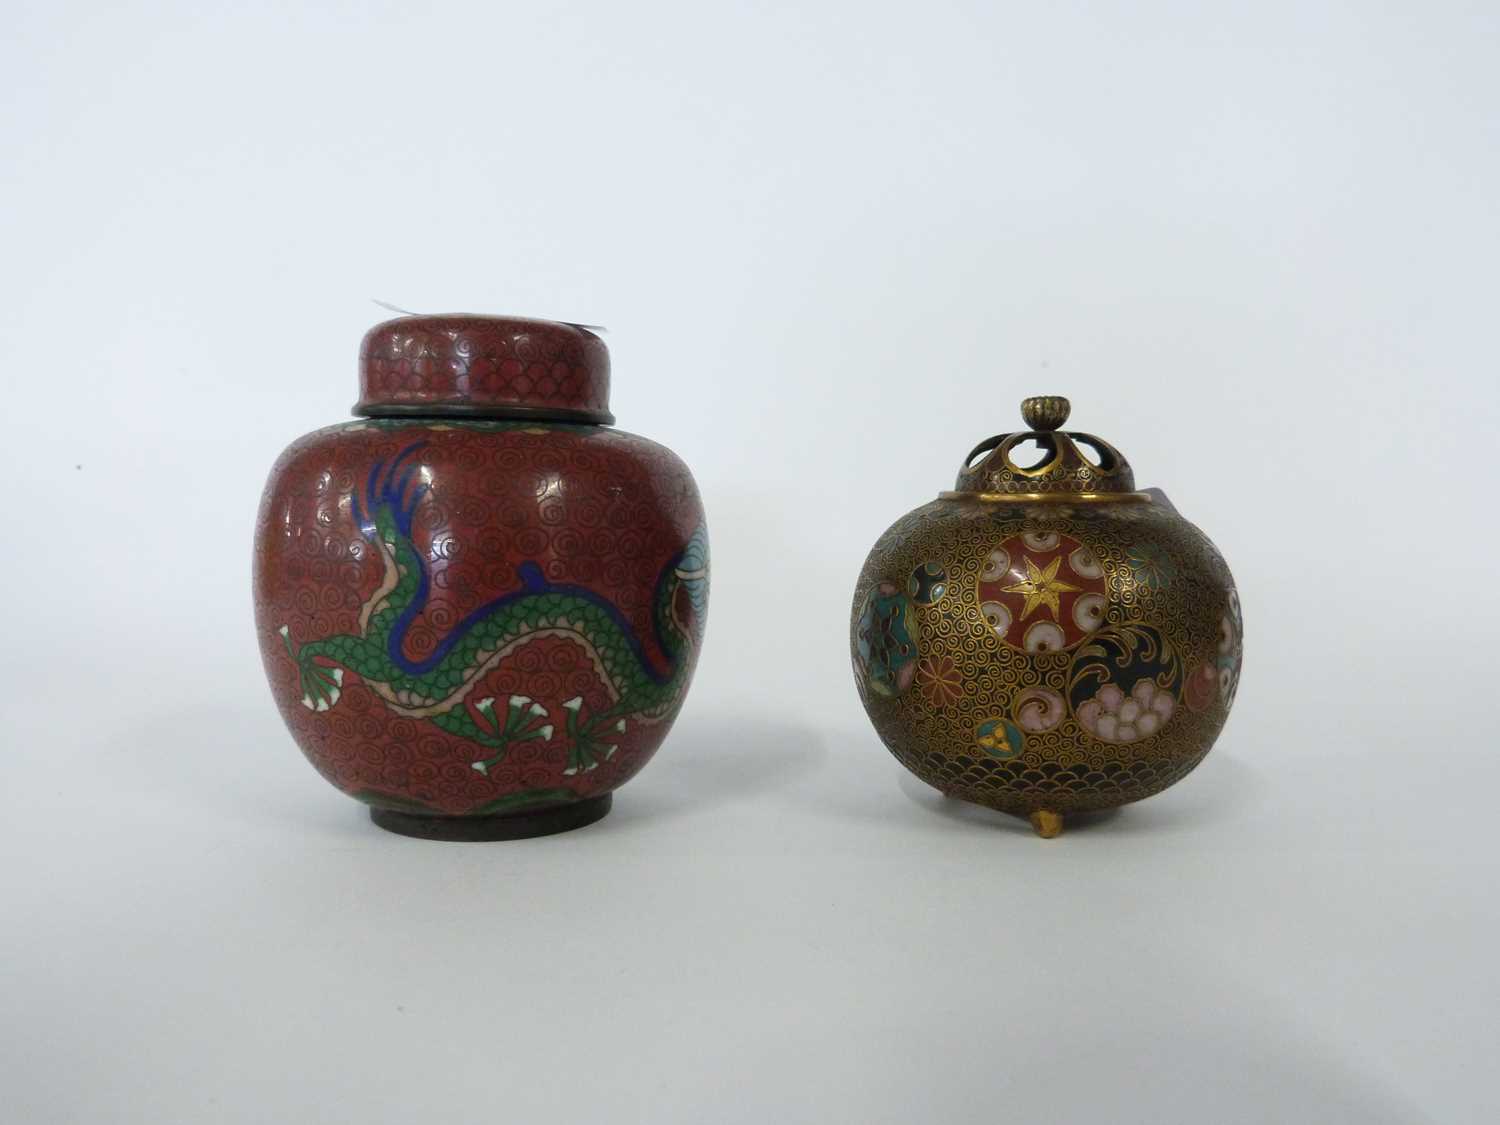 Cloisonne incense burner of globular form with pierced cover together with a small Cloisonne jar and